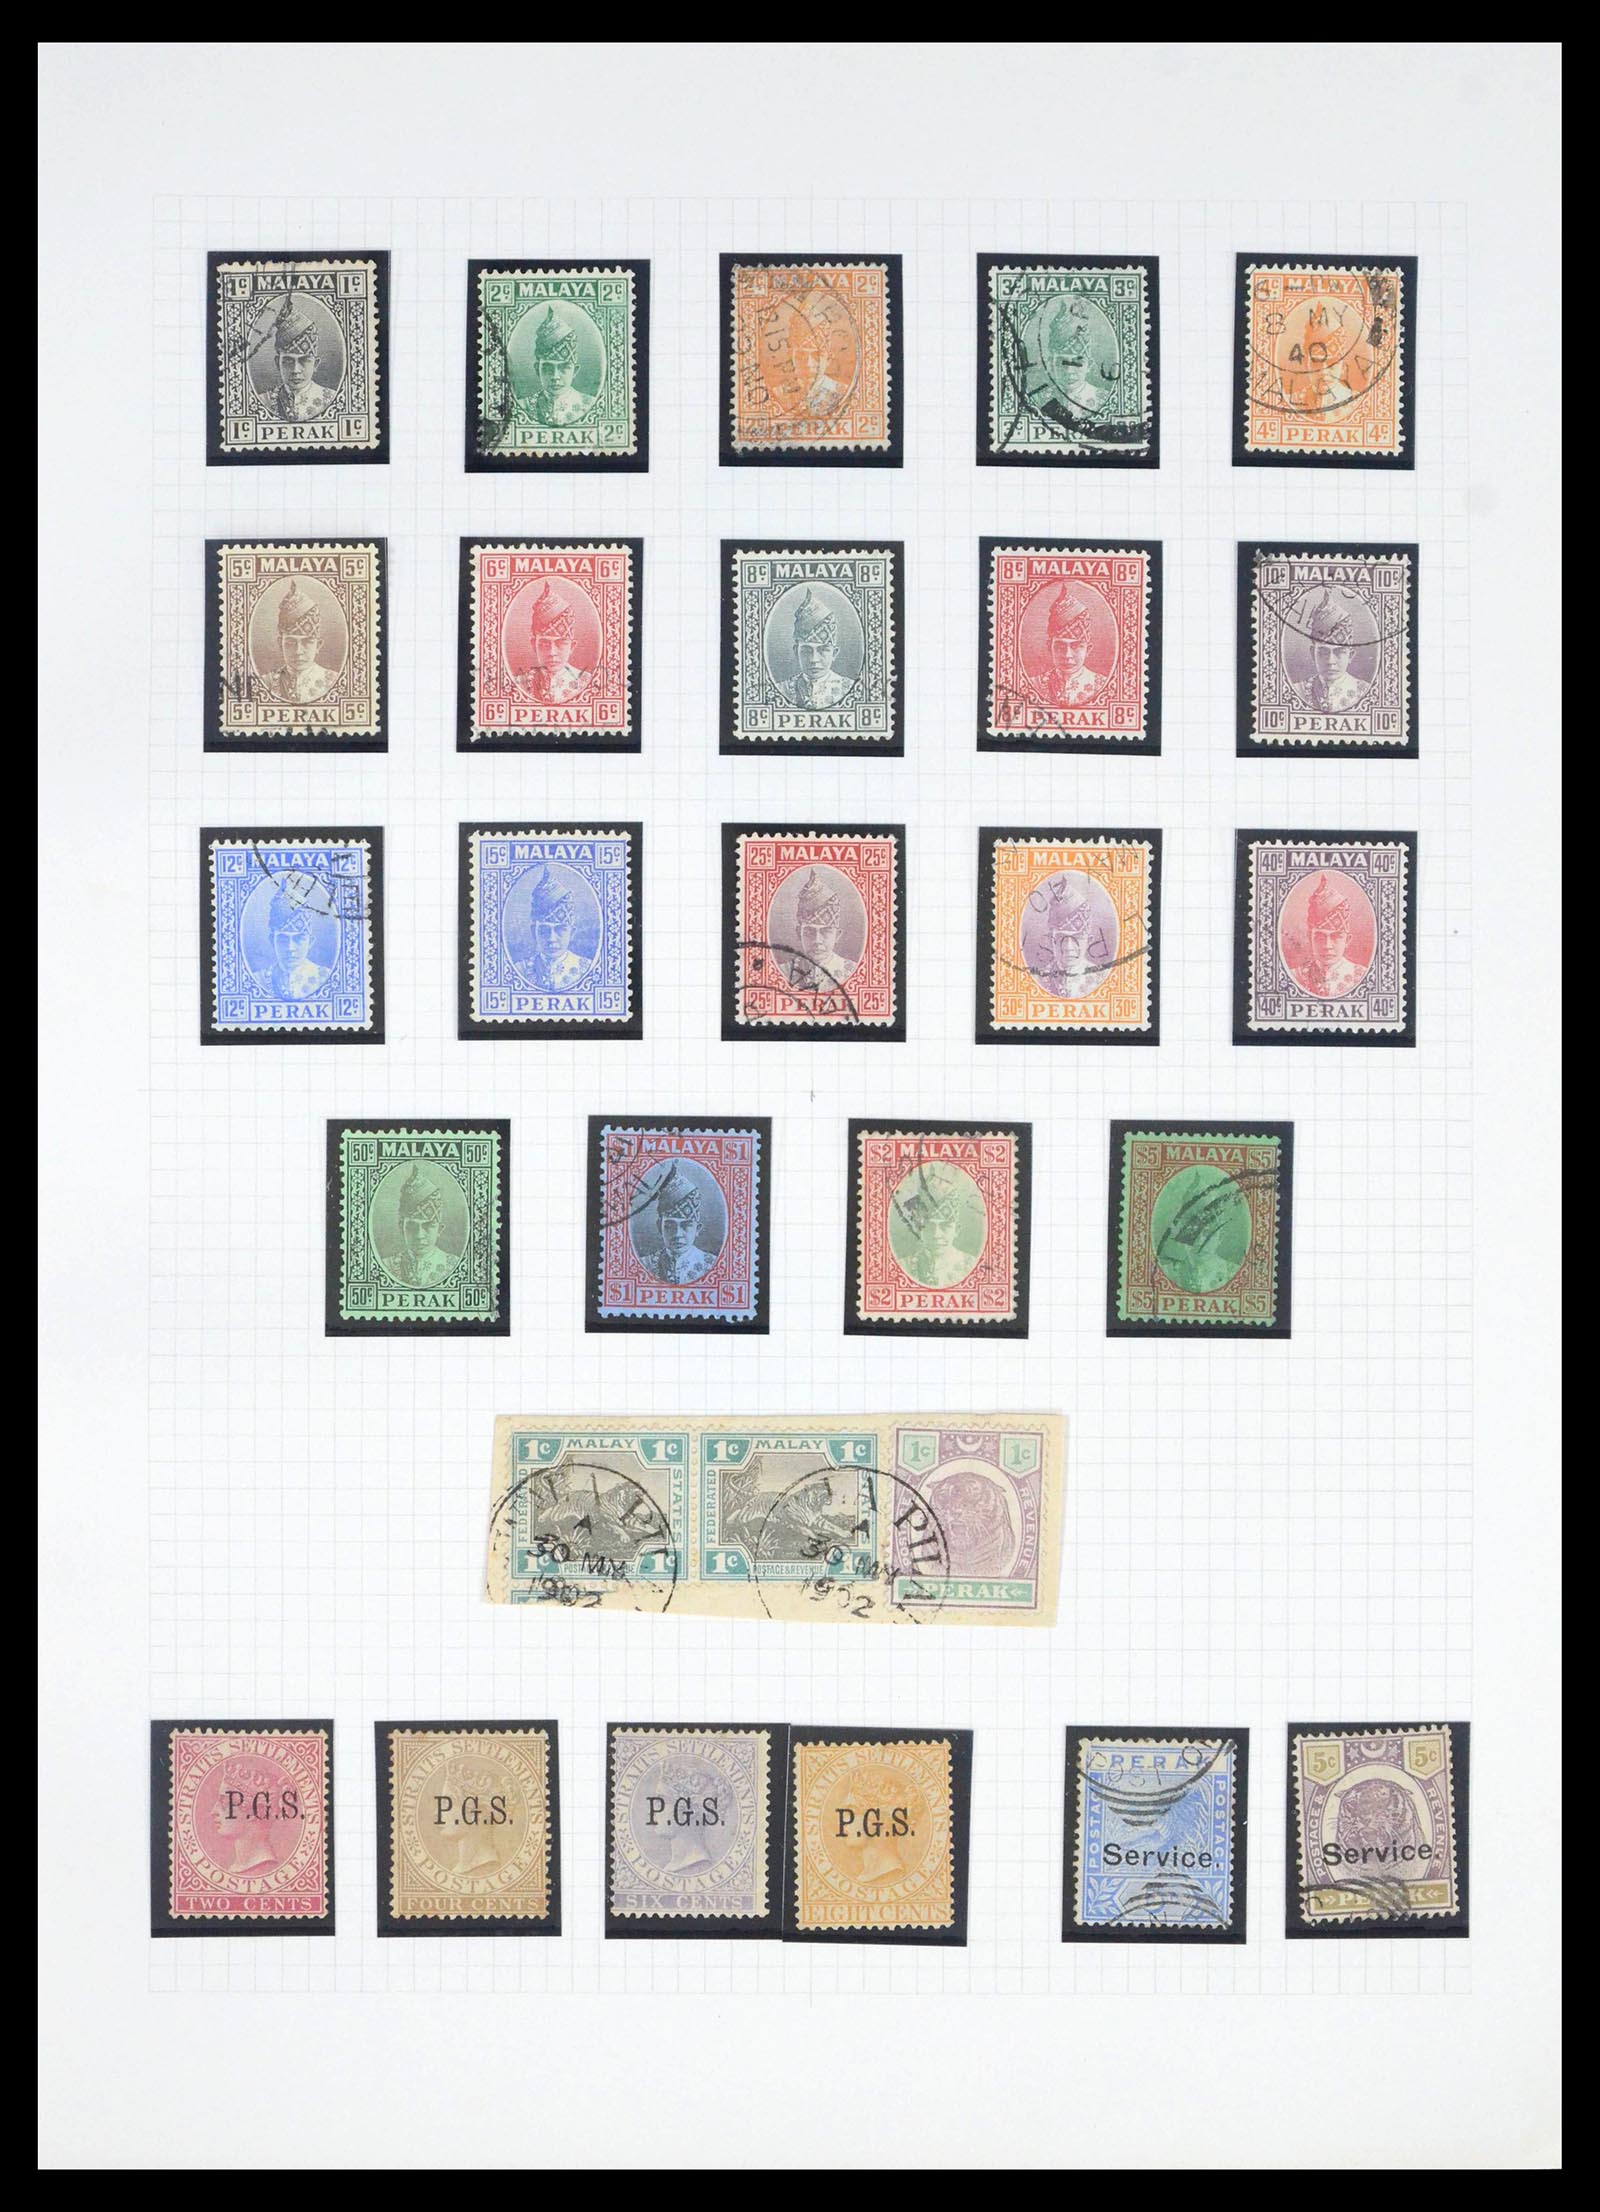 39470 0019 - Stamp collection 39470 Malayan States 1880-1965.